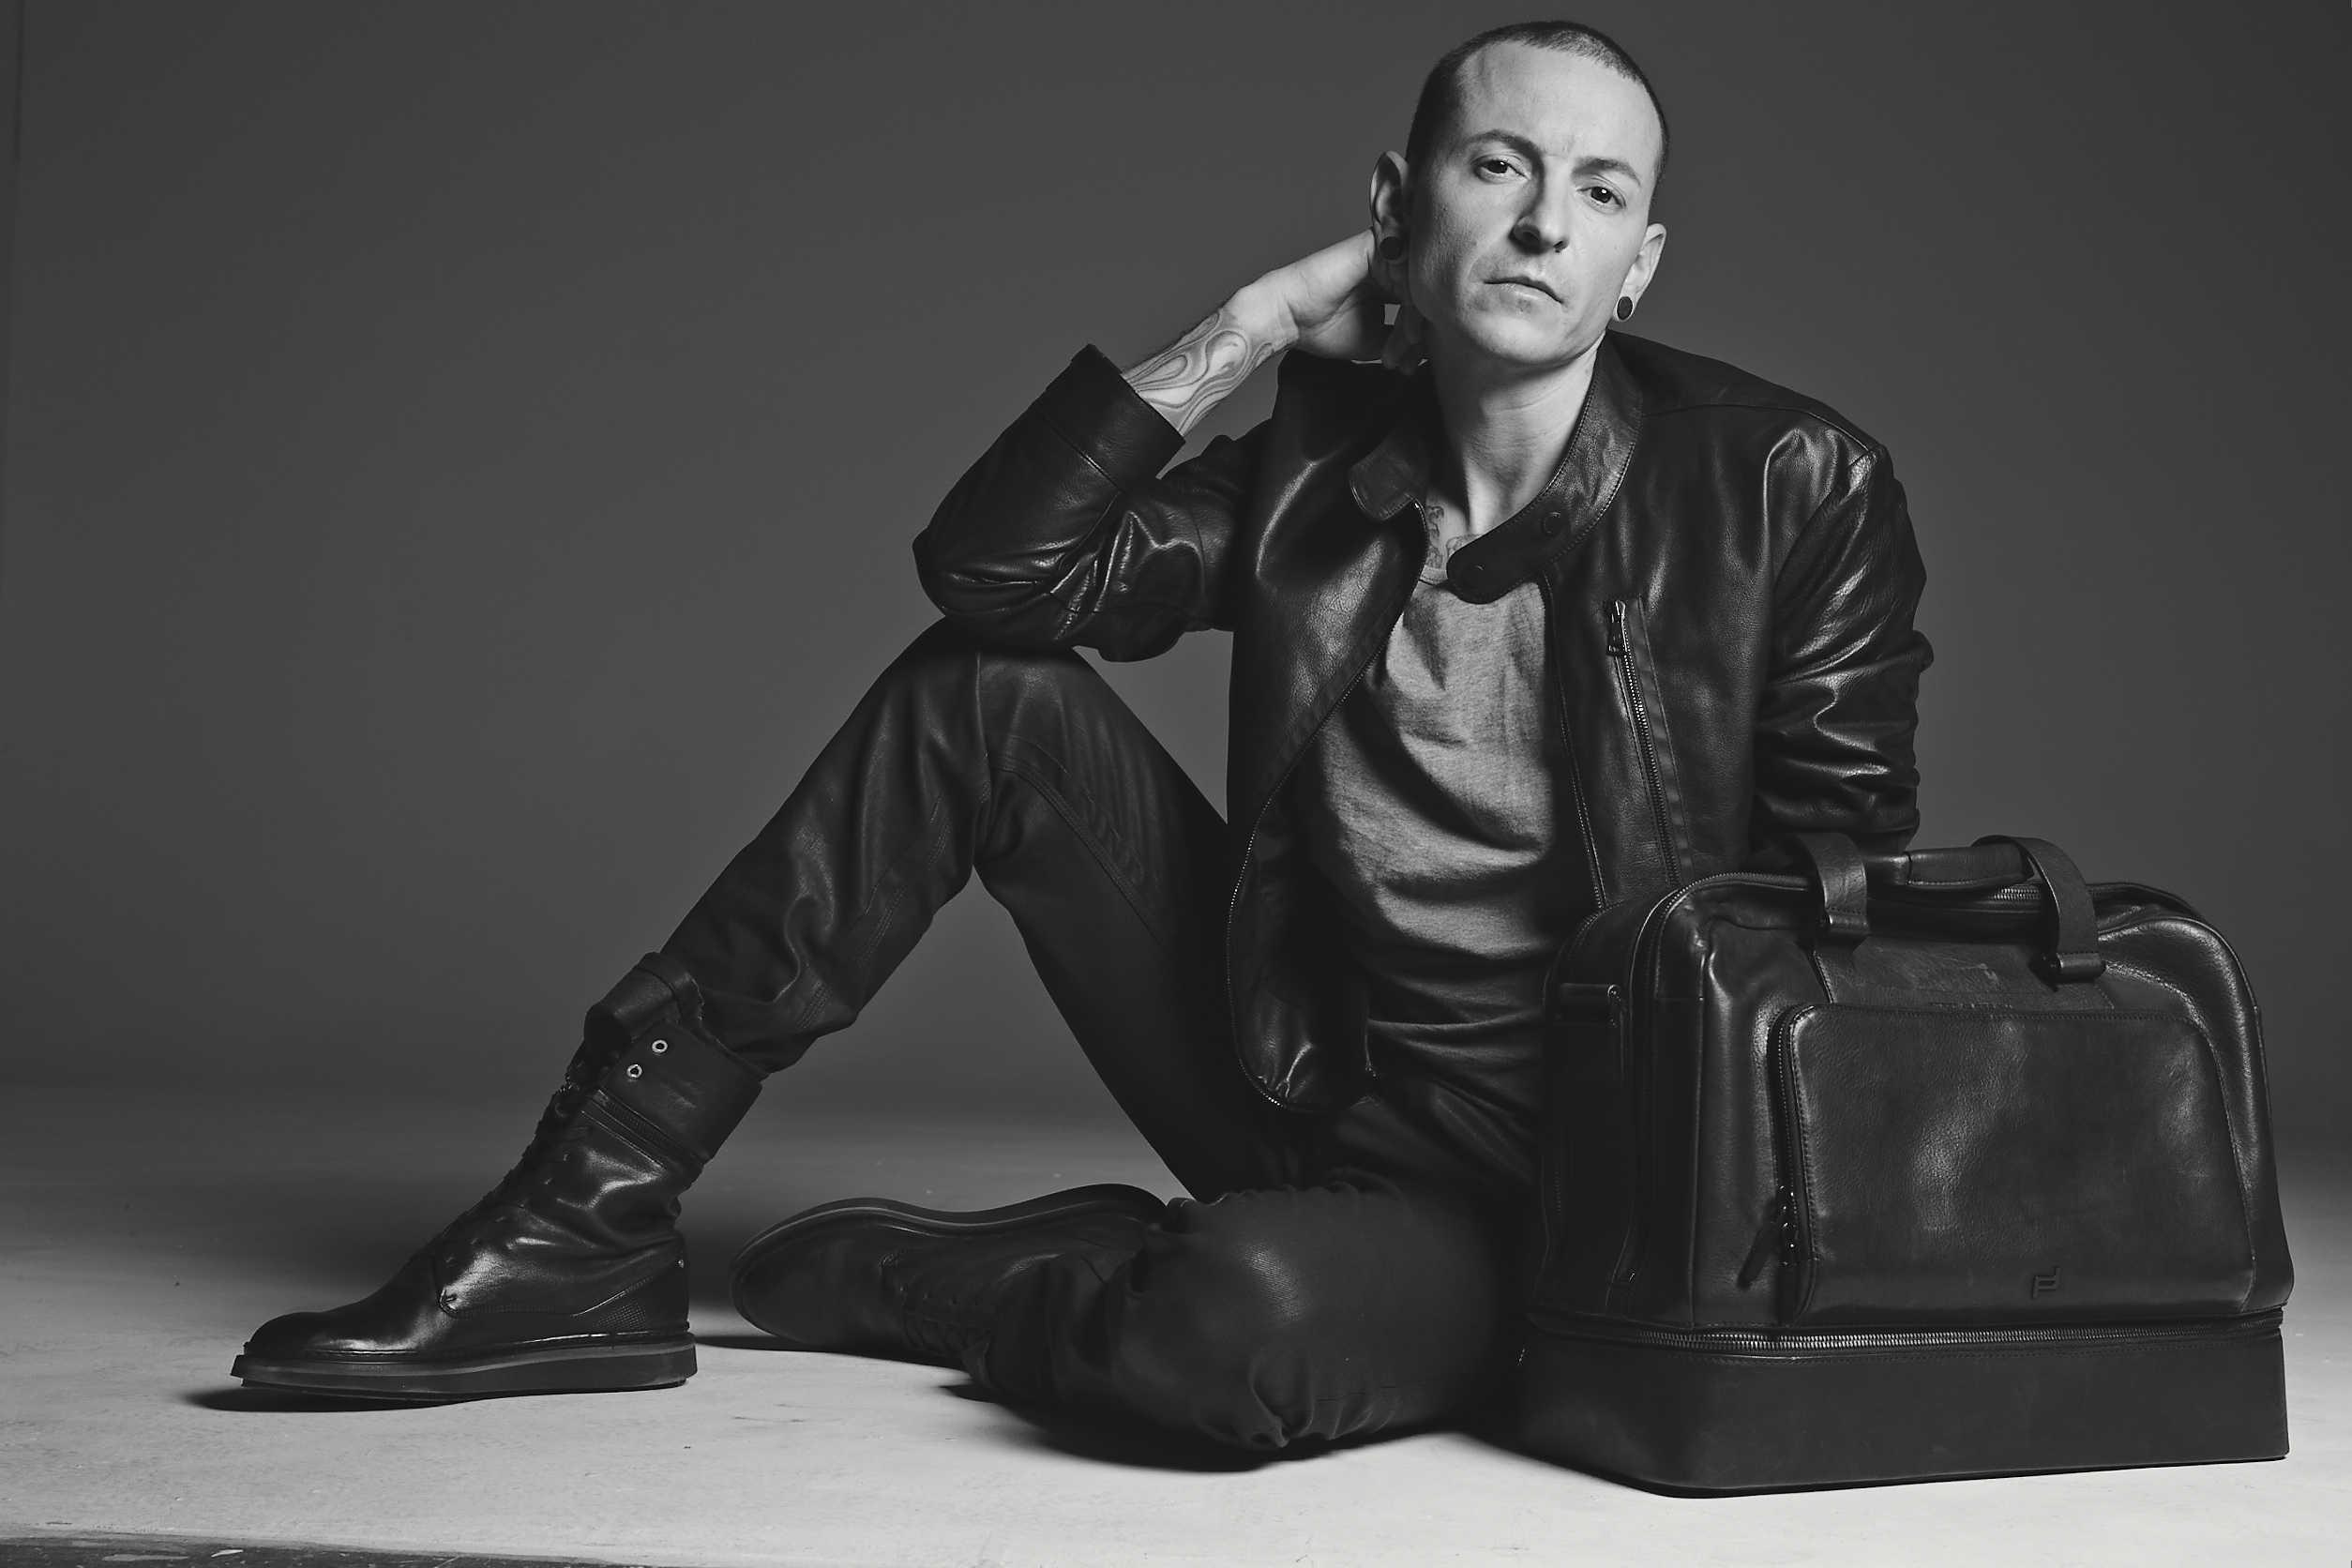 Chester Bennington Wallpaper Image Photo Picture Background